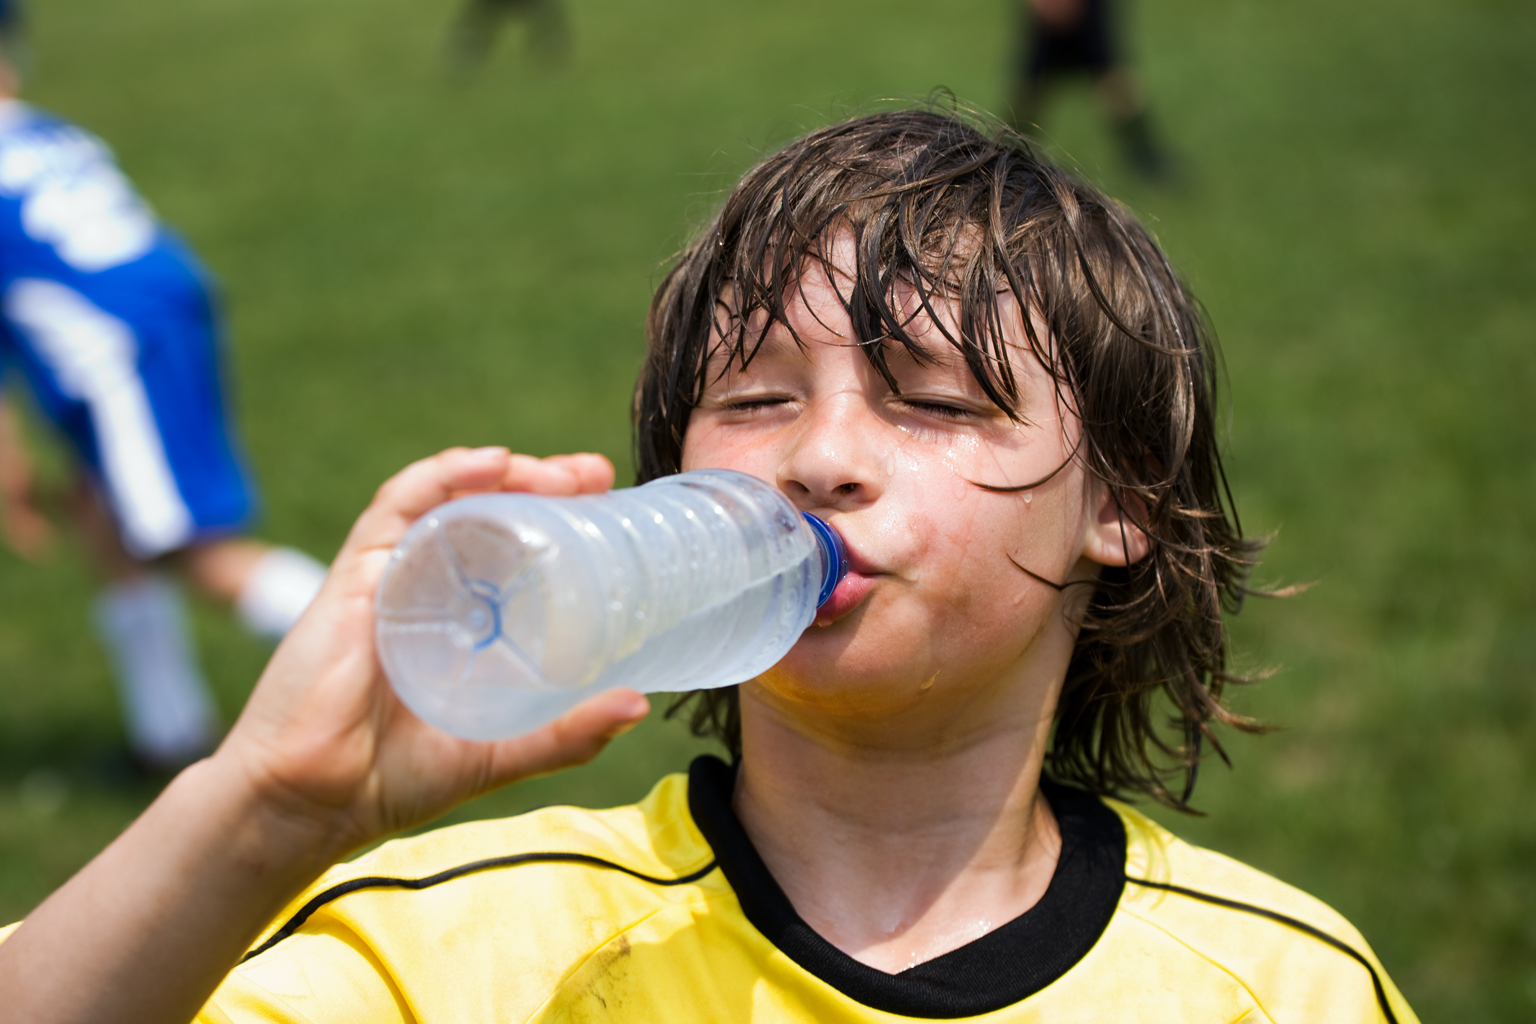 A boy with wet hair and face cools down with a drink of water.